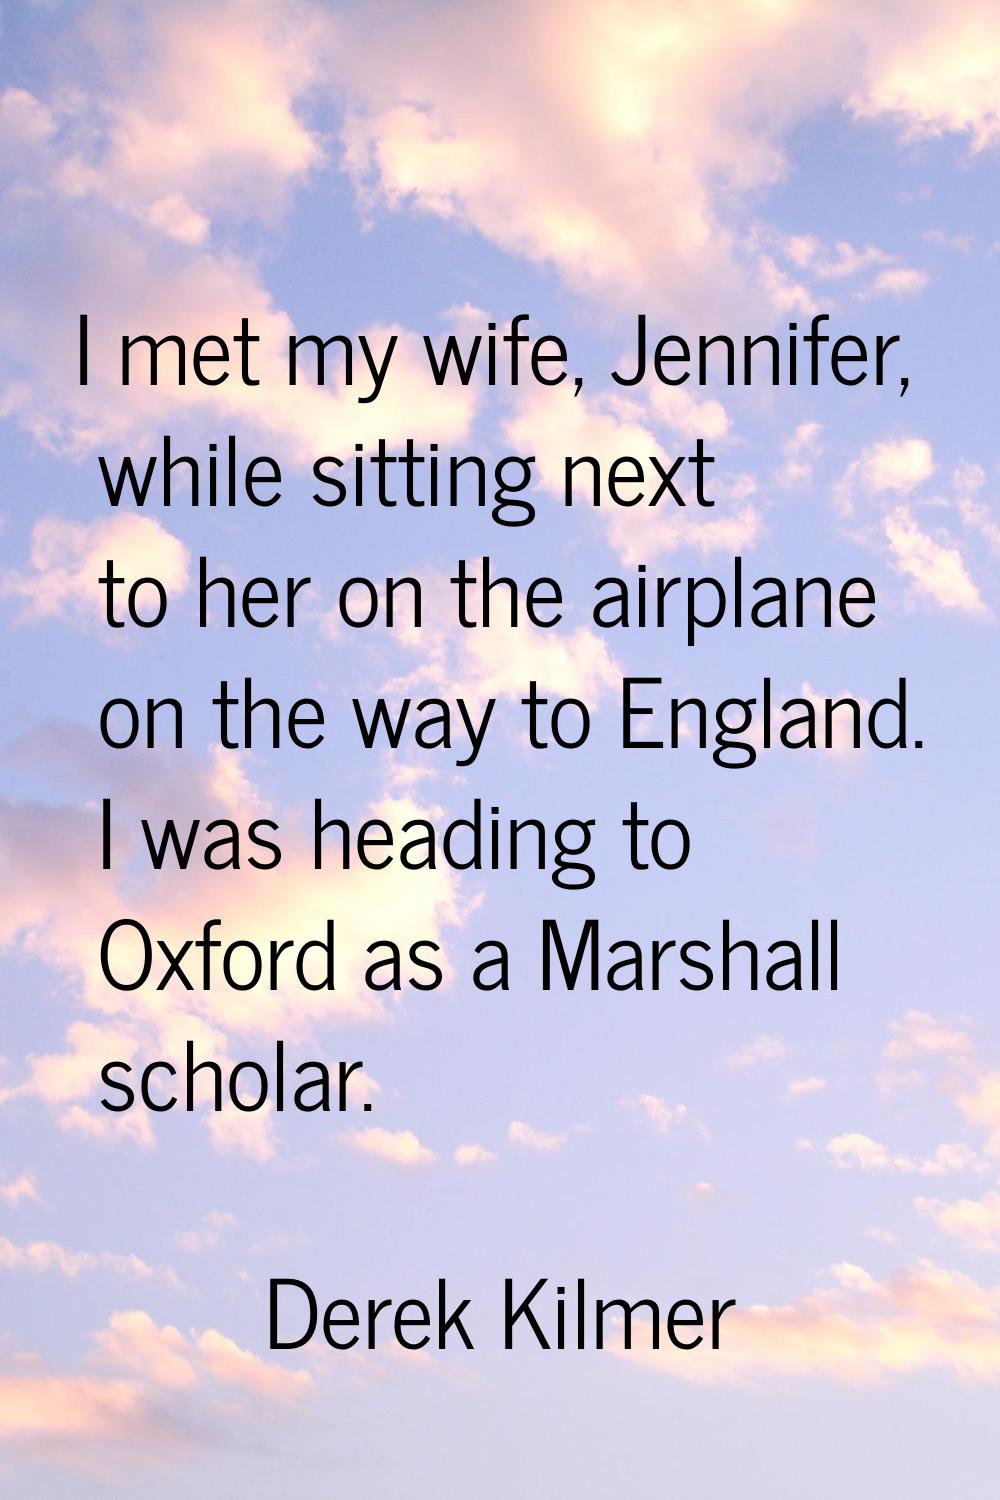 I met my wife, Jennifer, while sitting next to her on the airplane on the way to England. I was hea